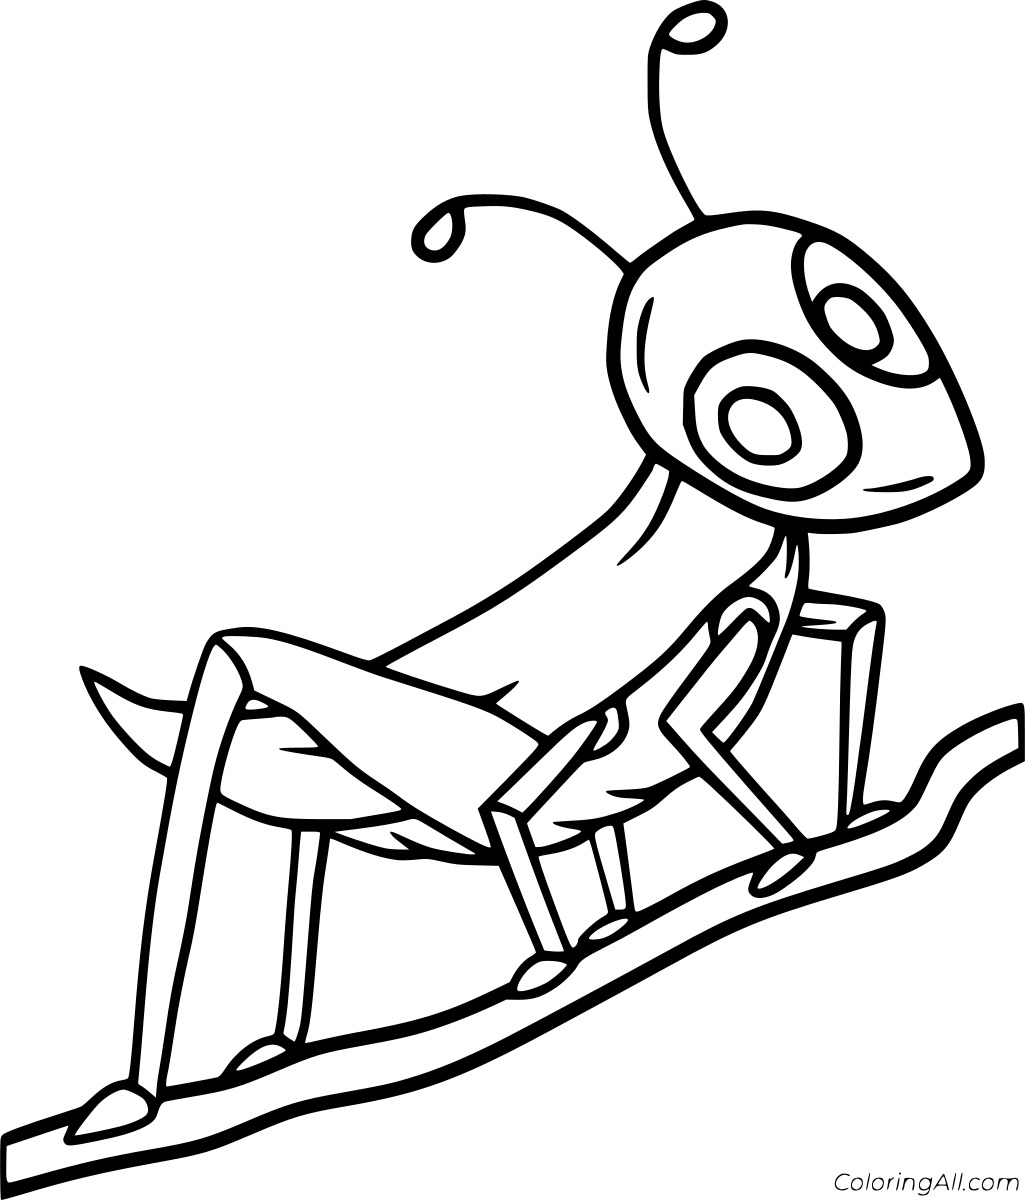 Grasshopper on the Branch Coloring Page